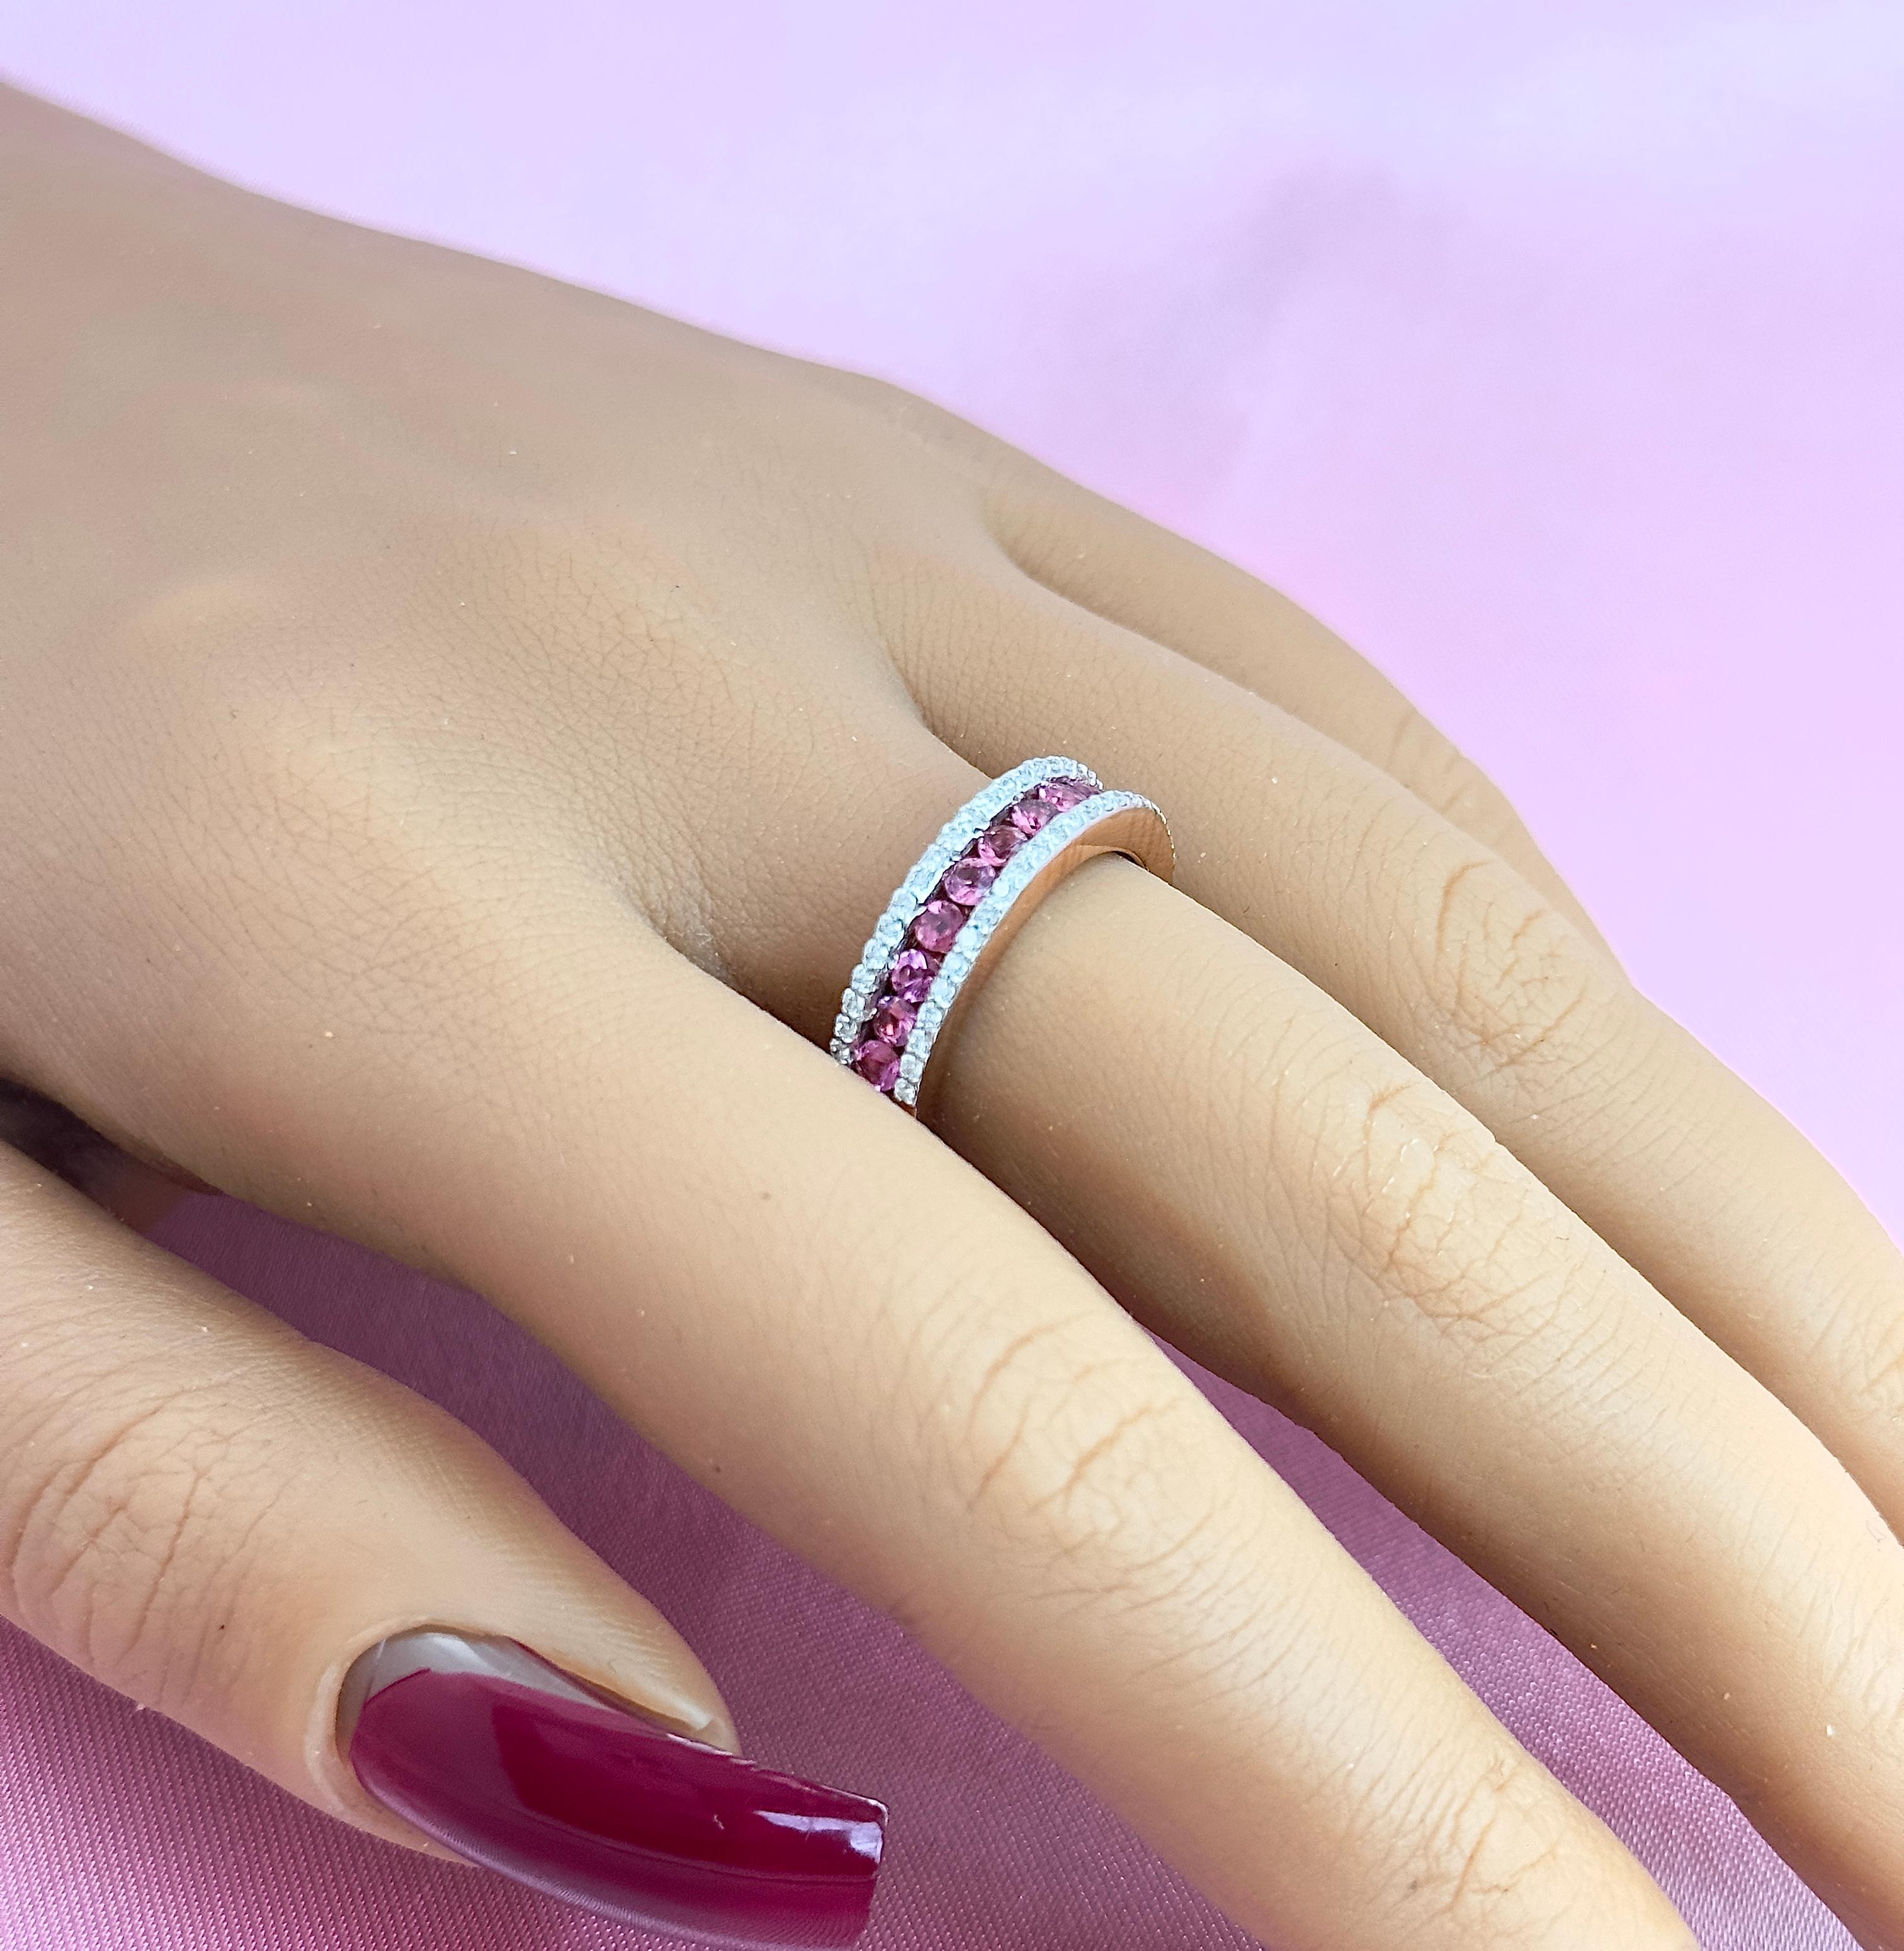 Pink Tourmaline and diamond half band set in rose gold is here! Pink tourmalines are just as beautiful as pink sapphires and they are more affordable. This half band is set in 14k gold with round pink tourmalines set in the center of the band in a